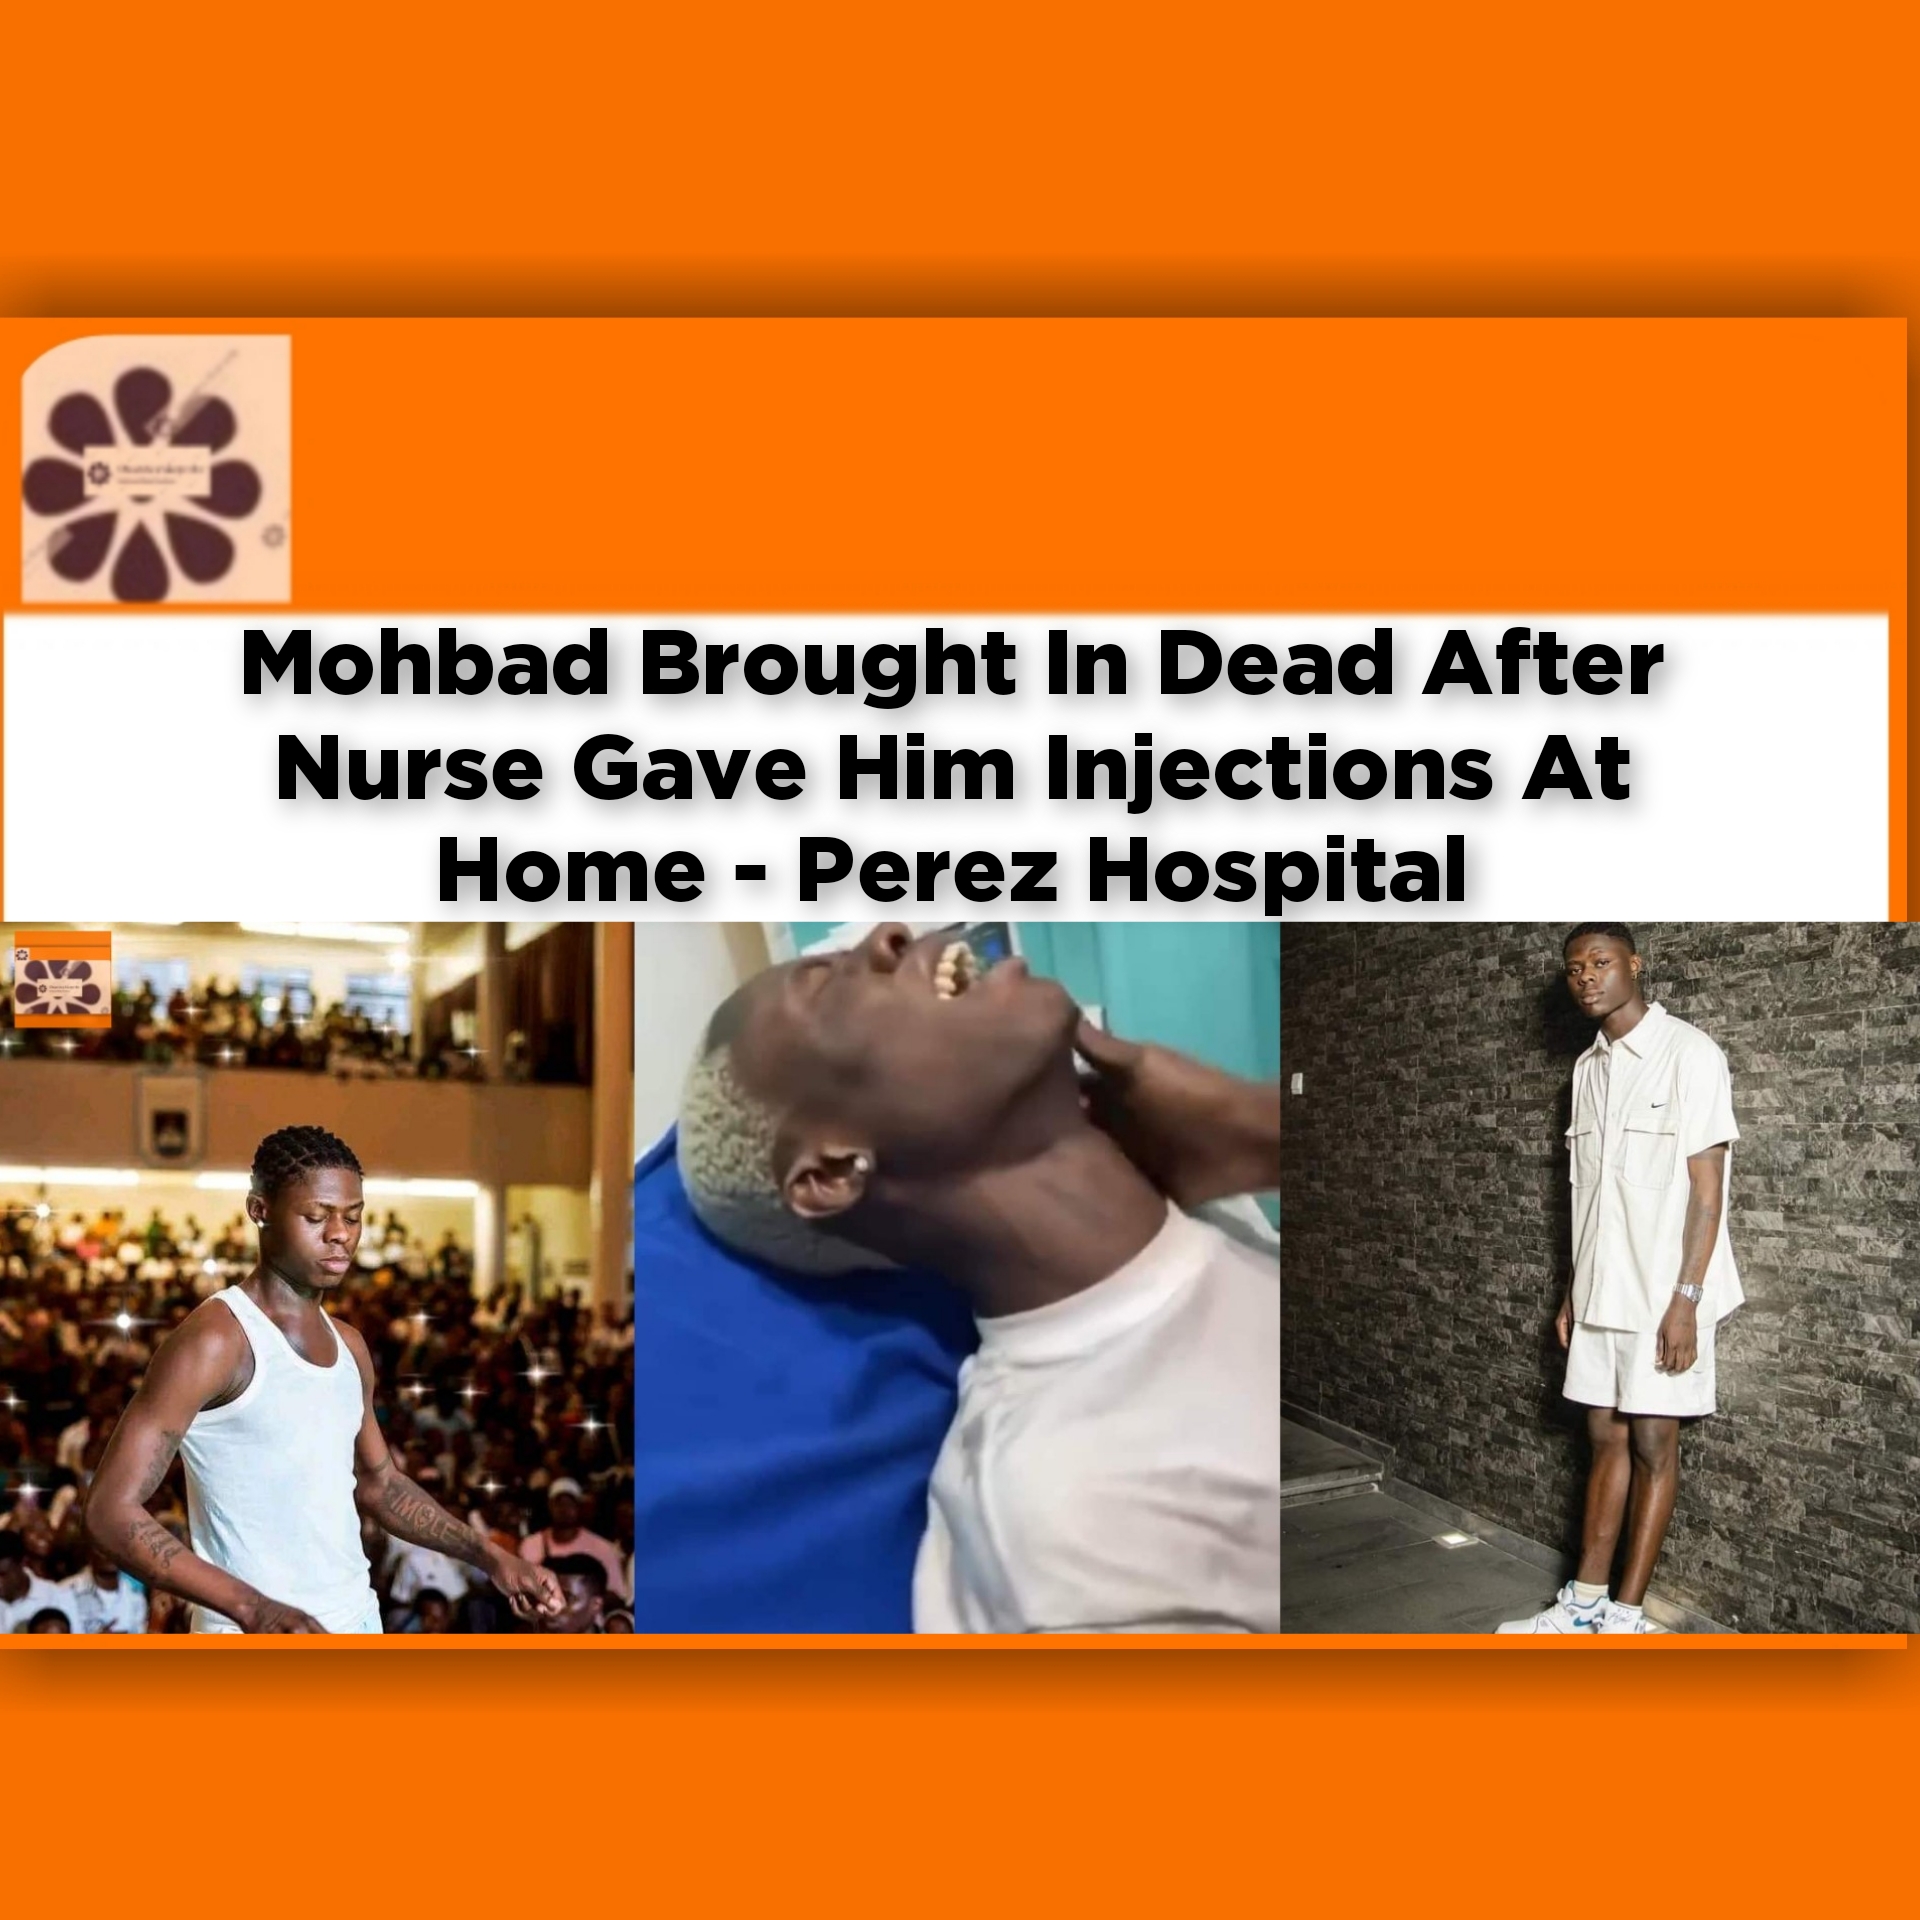 Mohbad Brought In Dead After Nurse Gave Him Injections At Home - Perez Hospital ~ OsazuwaAkonedo #politics